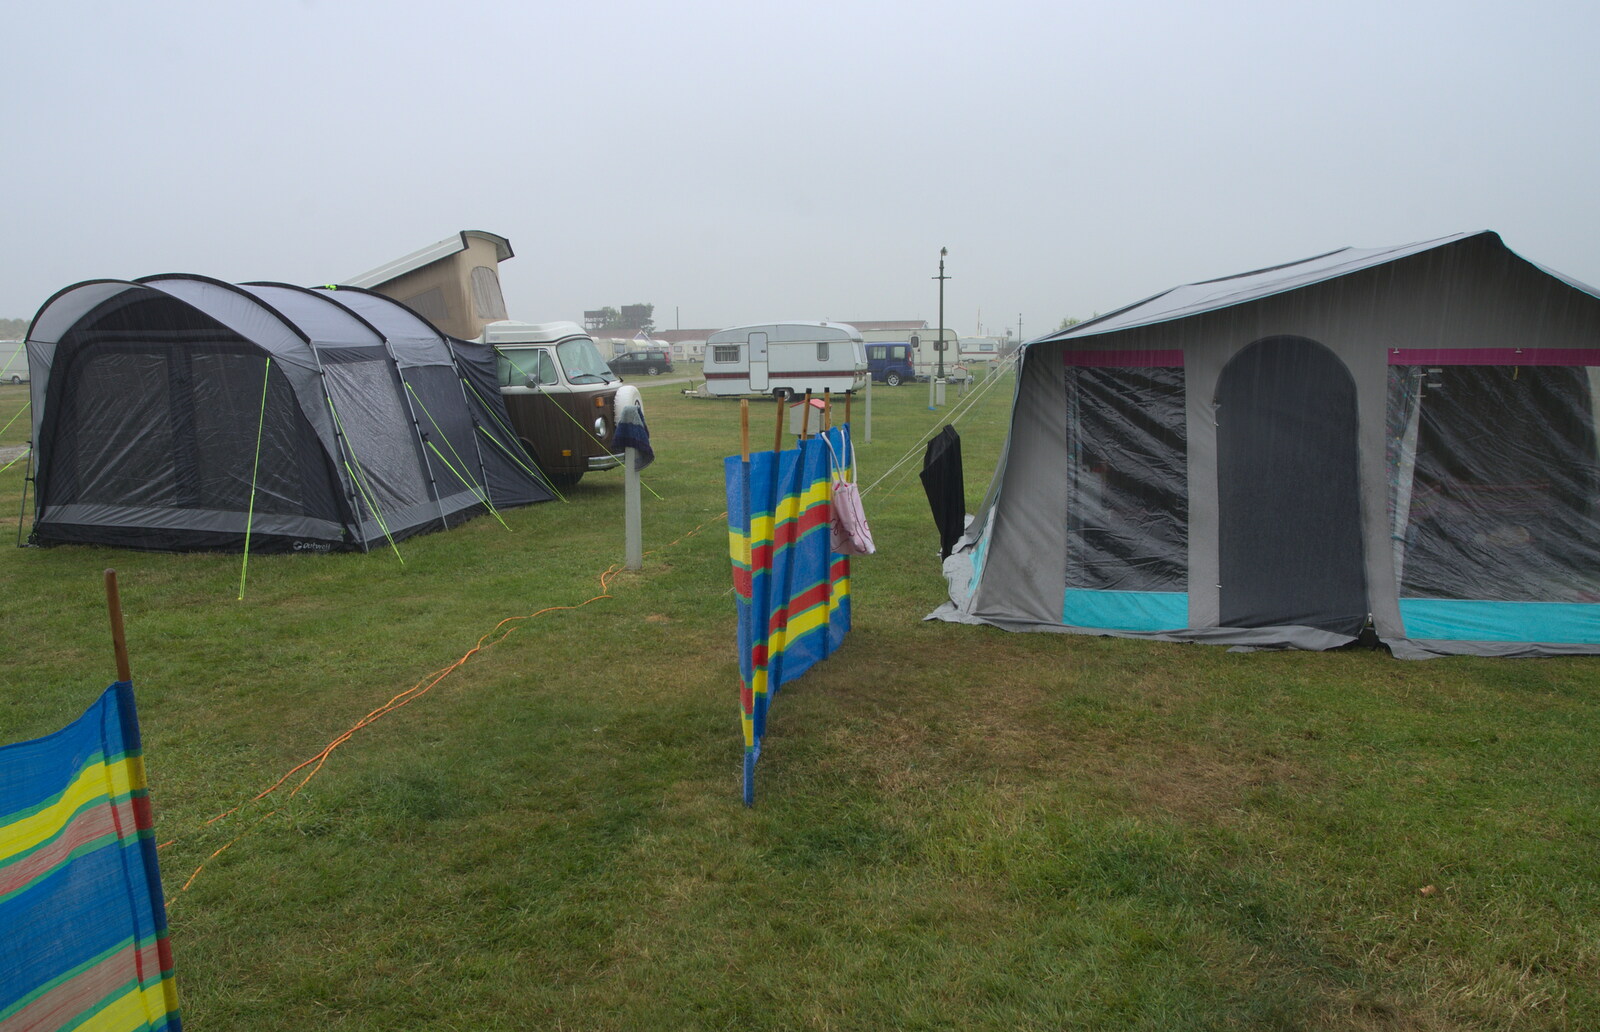 It starts lashing it from A Wet Weekend of Camping, Waxham Sands, Norfolk - 13th June 2015